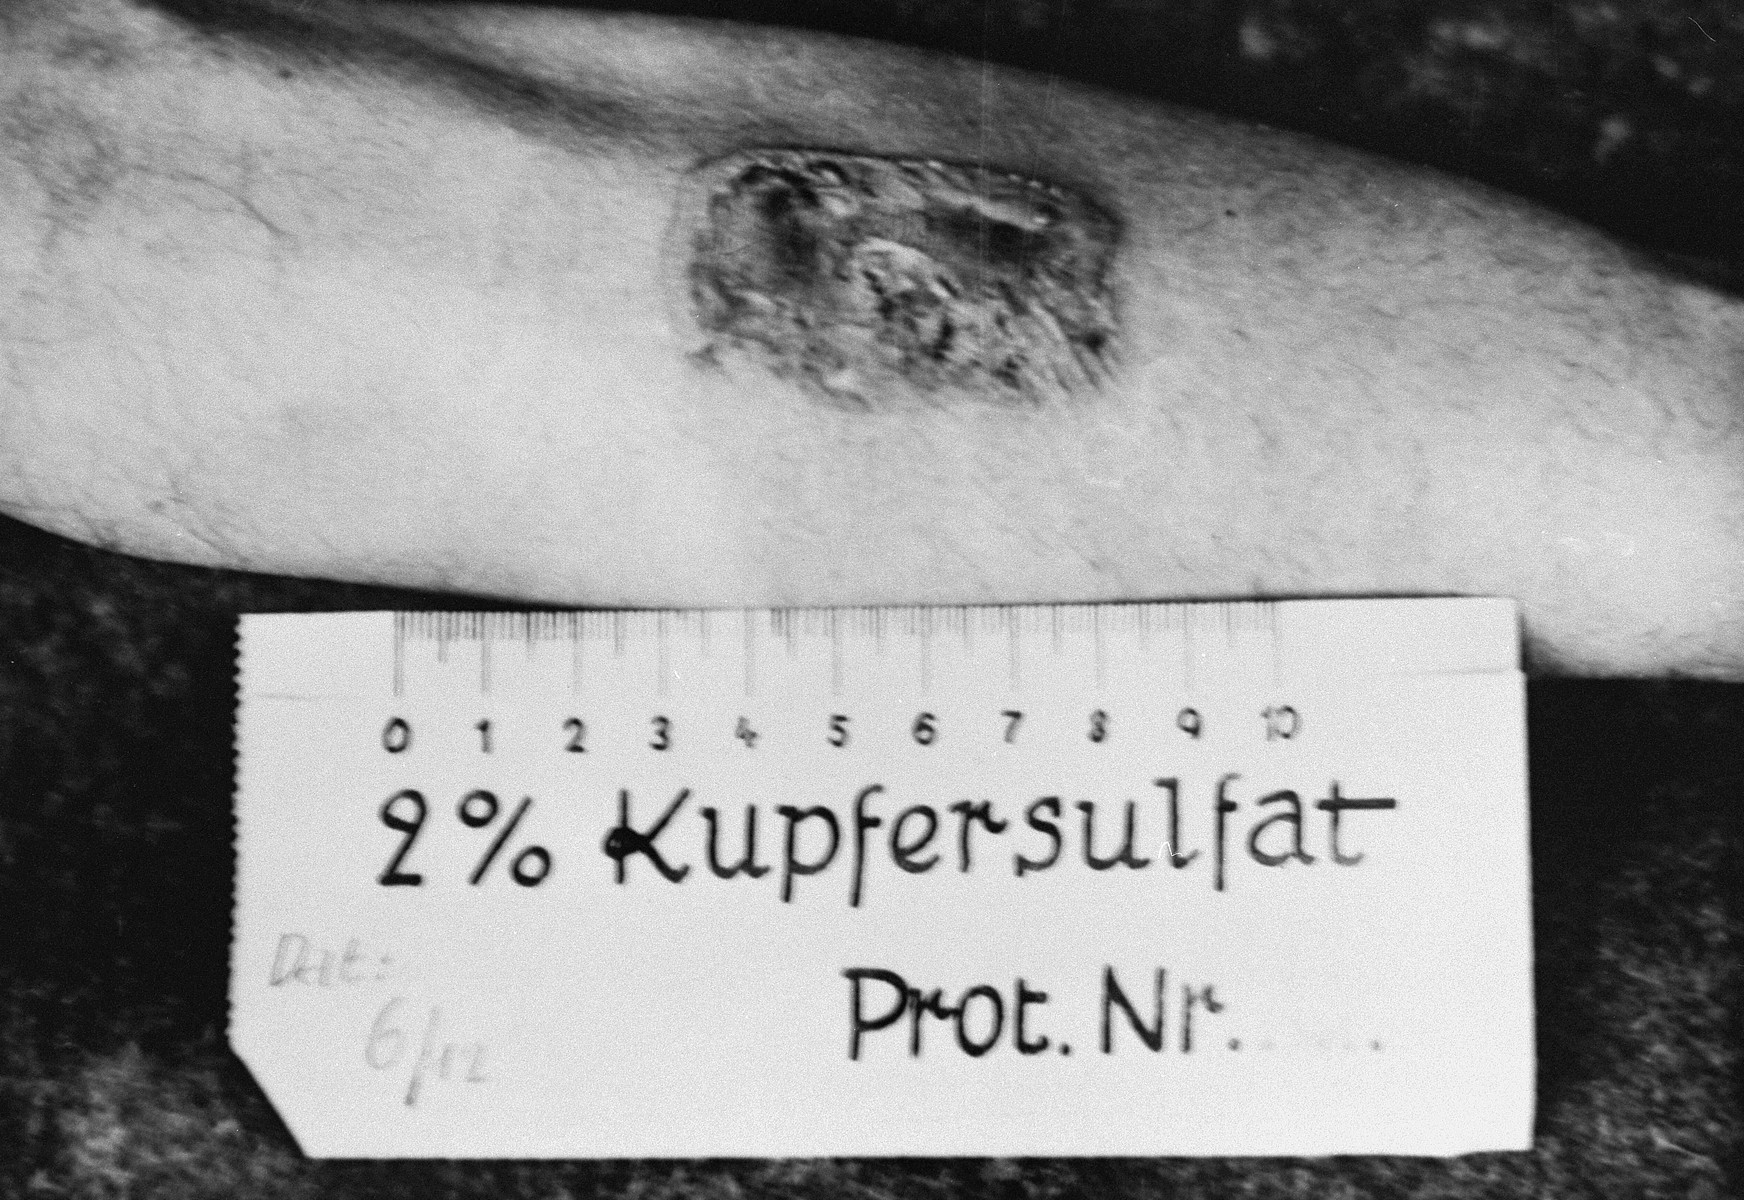 A photograph of the results of a medical experiment dealing with phosphorous that was carried out by doctors at Ravensbrueck.  

In the experiment, a mixture of phosphorus and rubber was applied to the skin and ignited.  After twenty seconds, the fire was extinguished with water and then wiped with R17.  After three days, the burn was treated with Echinacin in liquid form.  After two weeks the wound had healed.  This photograph, taken by a camp physician, was entered as evidence during the Doctors Trial at Nuremberg.